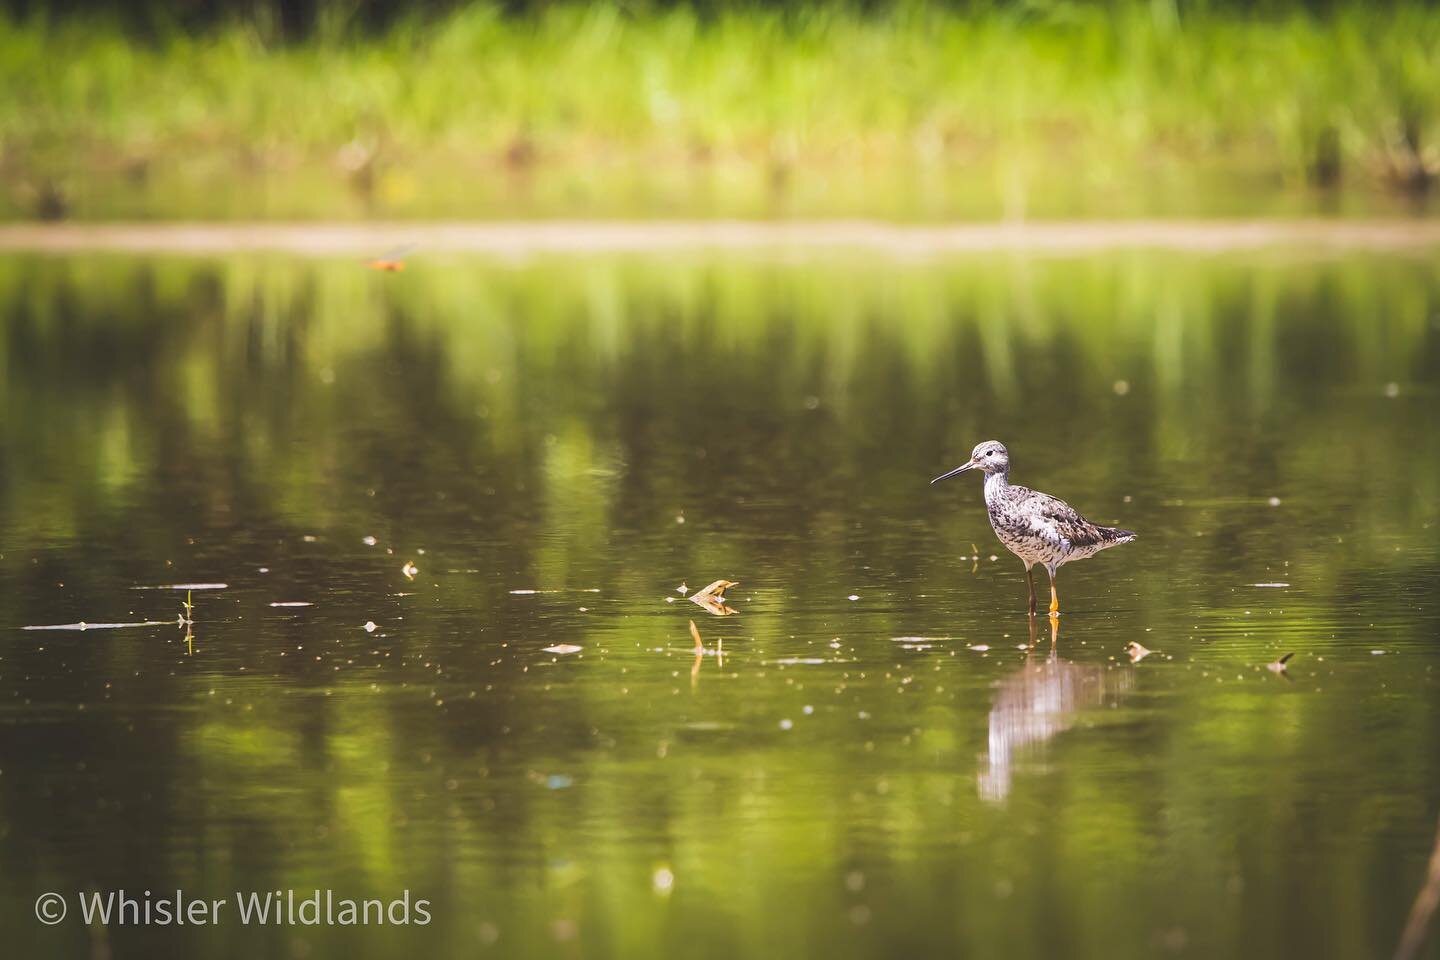 Paper Mill Flats.  Heron, Egrets, Terns, Greater Yellow Legs, and many other forms of wildlife ere very active at this wetland. 
#nature #naturephotography #outdoors #outdoorphotography #wildlife #wildlifephotography #bird #birding #birdphotography #